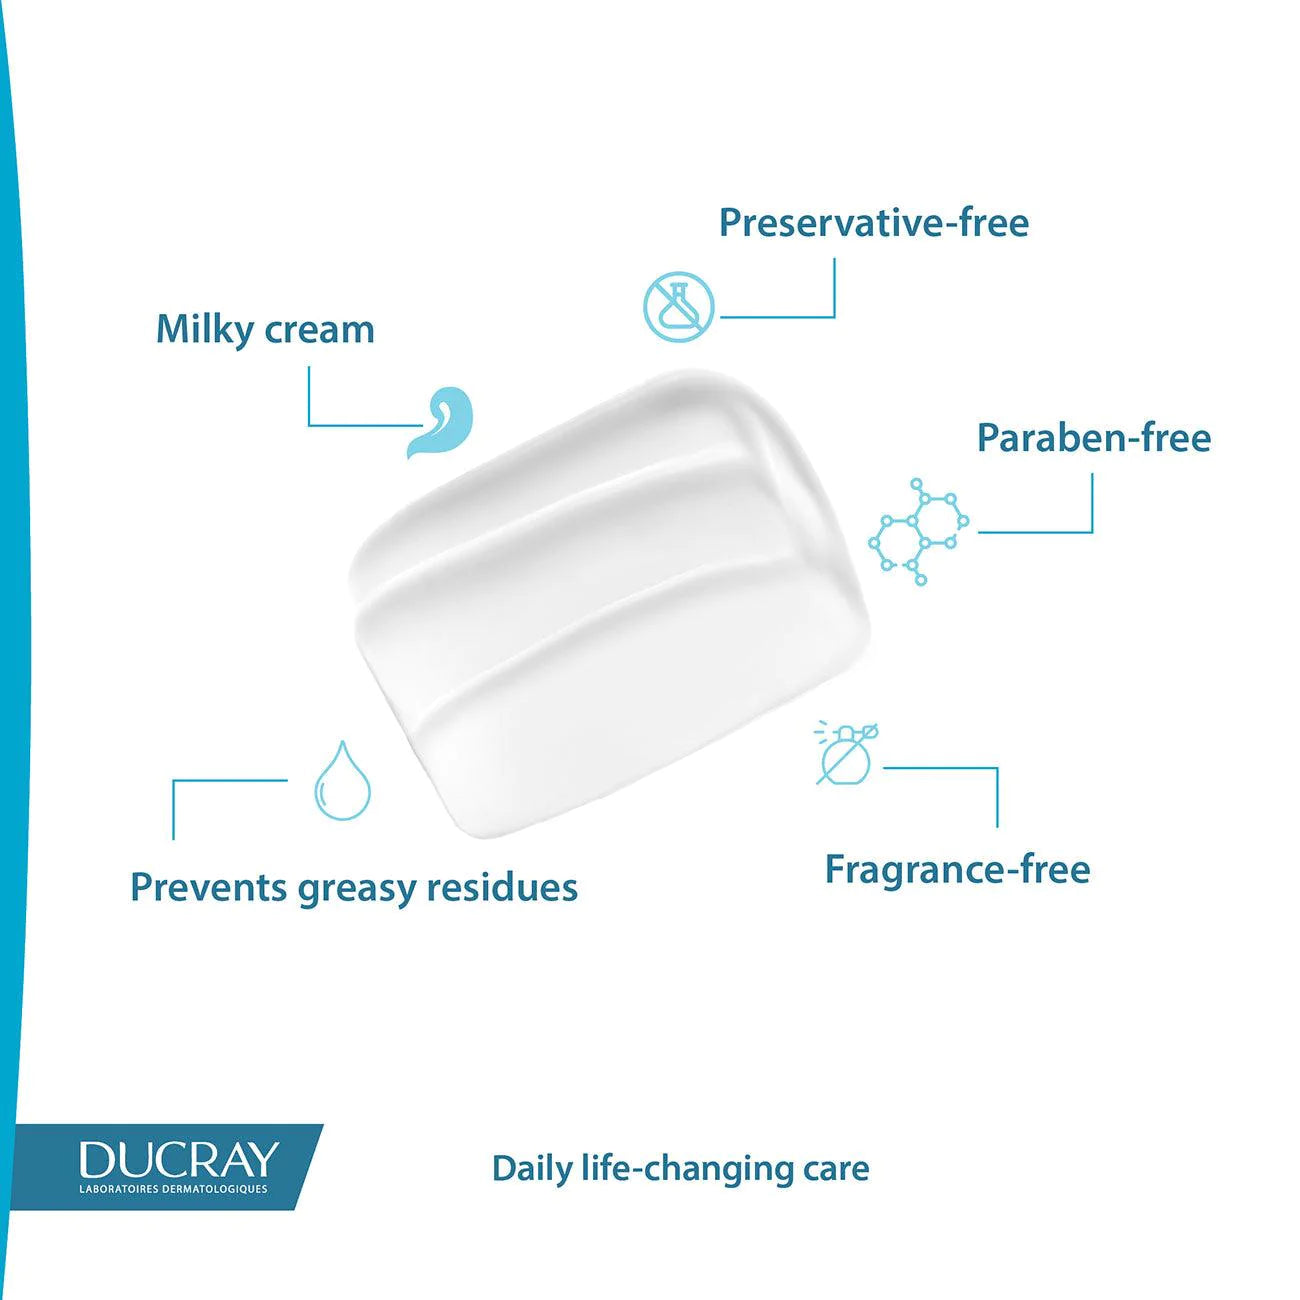 DUCRAY Keracnyl Repair Cream 48H of Hydration - Acne-Prone Skin Using Drying Treatments